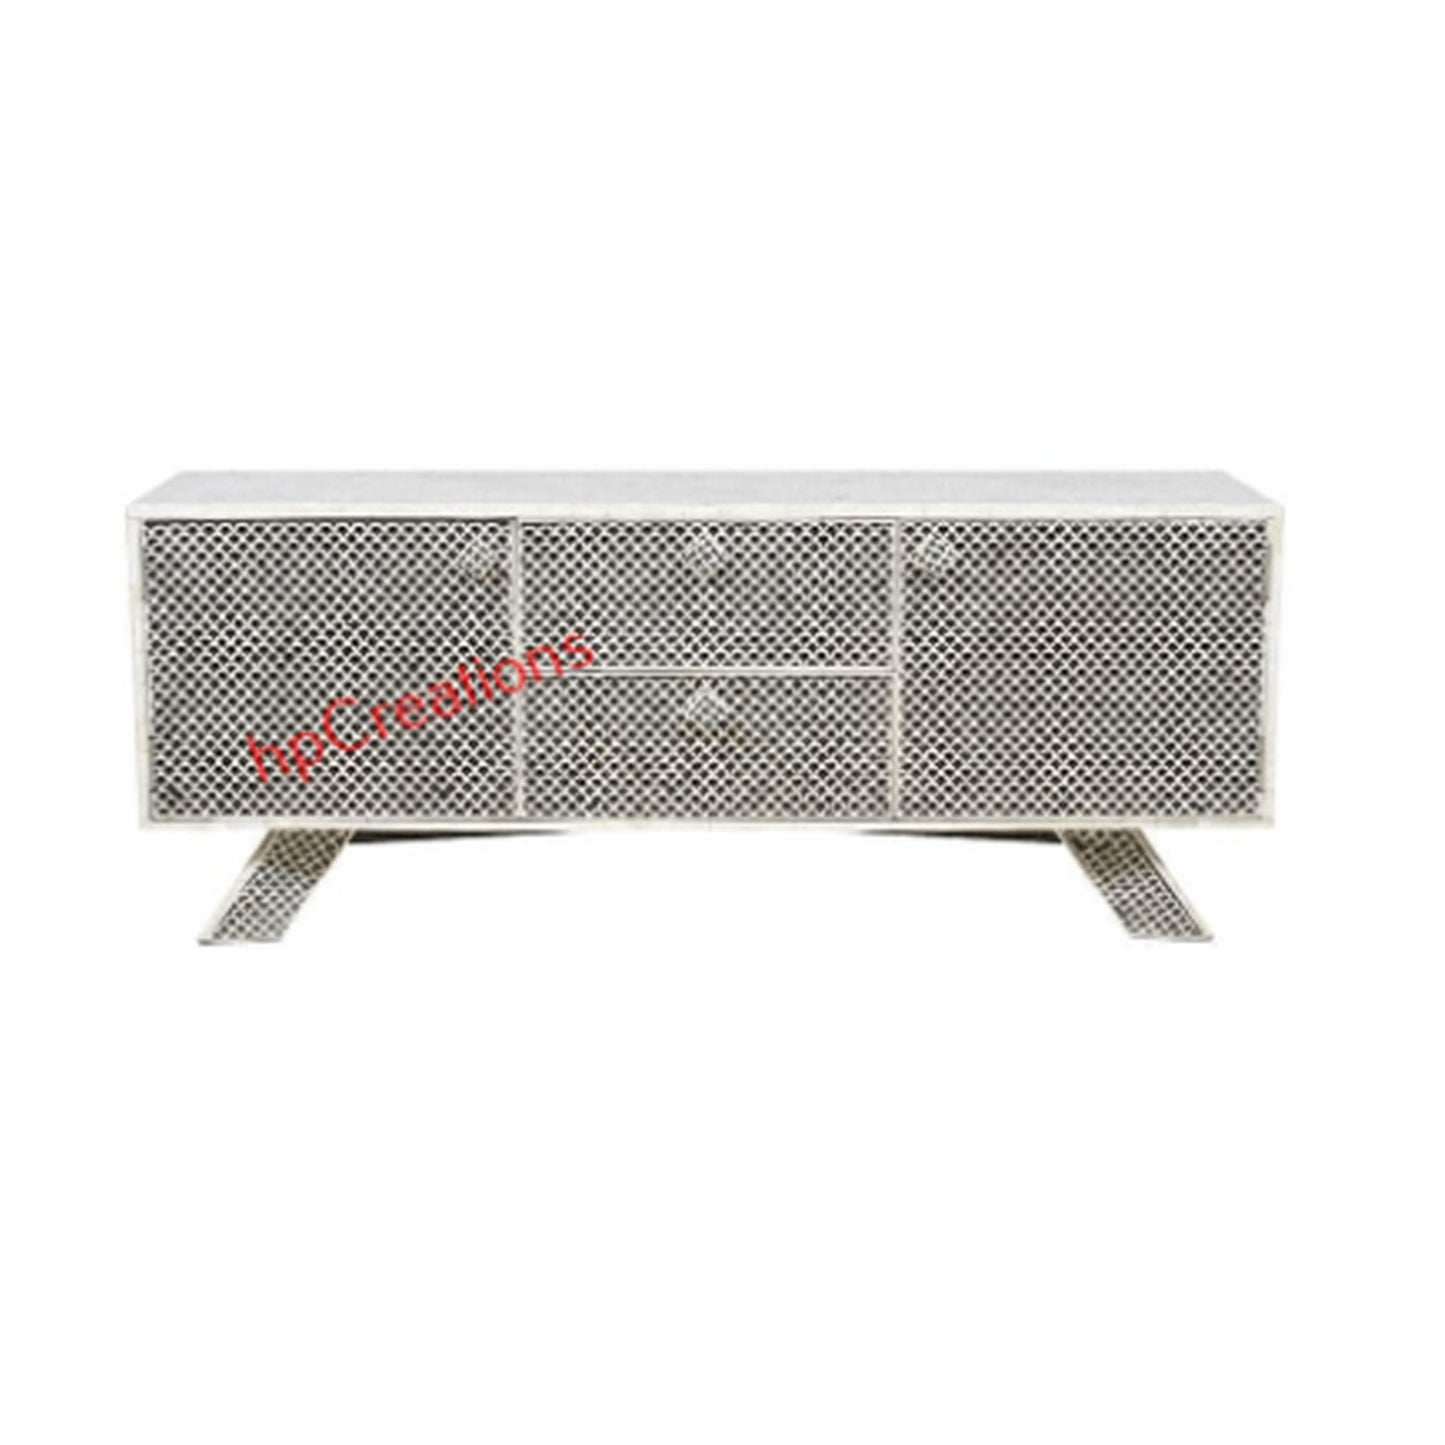 Personalized Handmade Bone Inlay Low Cabinet With Small Fish Scale Pattern